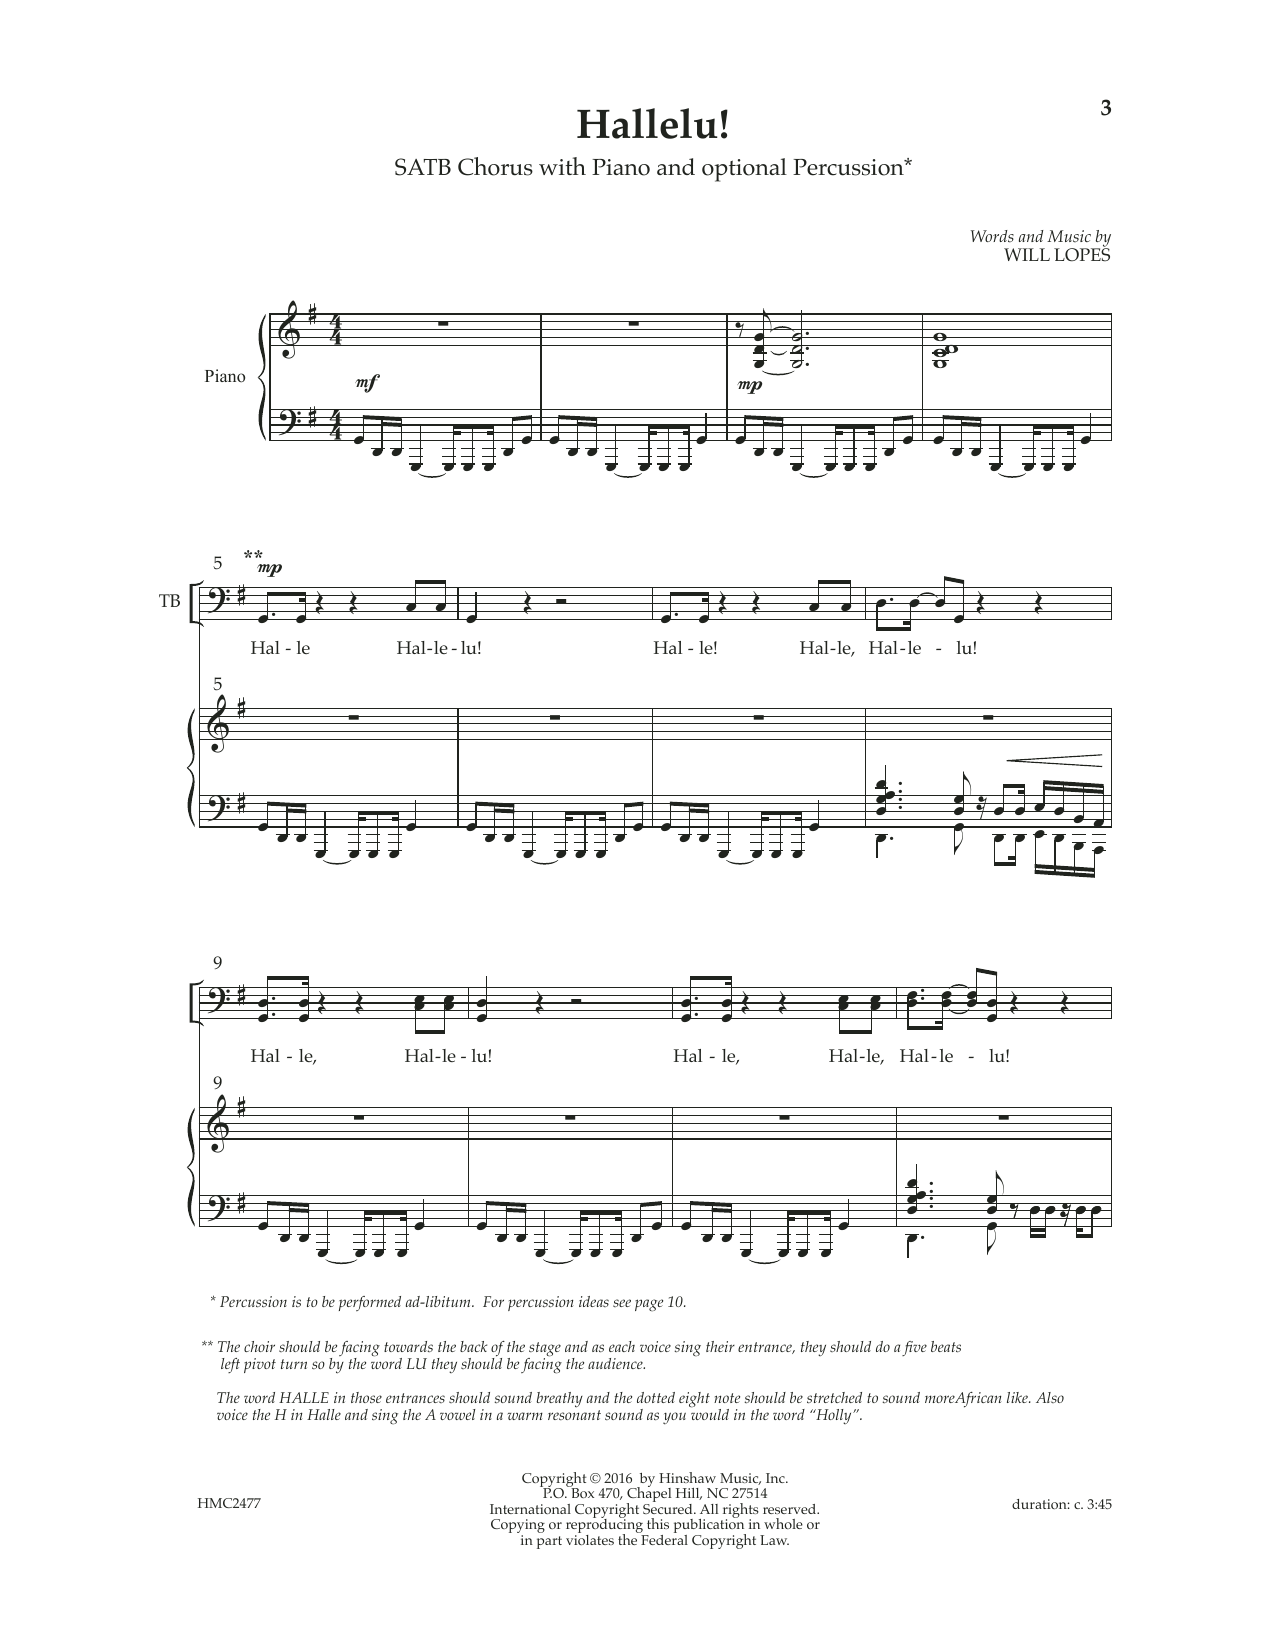 Download Will Lopes Hallelu Sheet Music